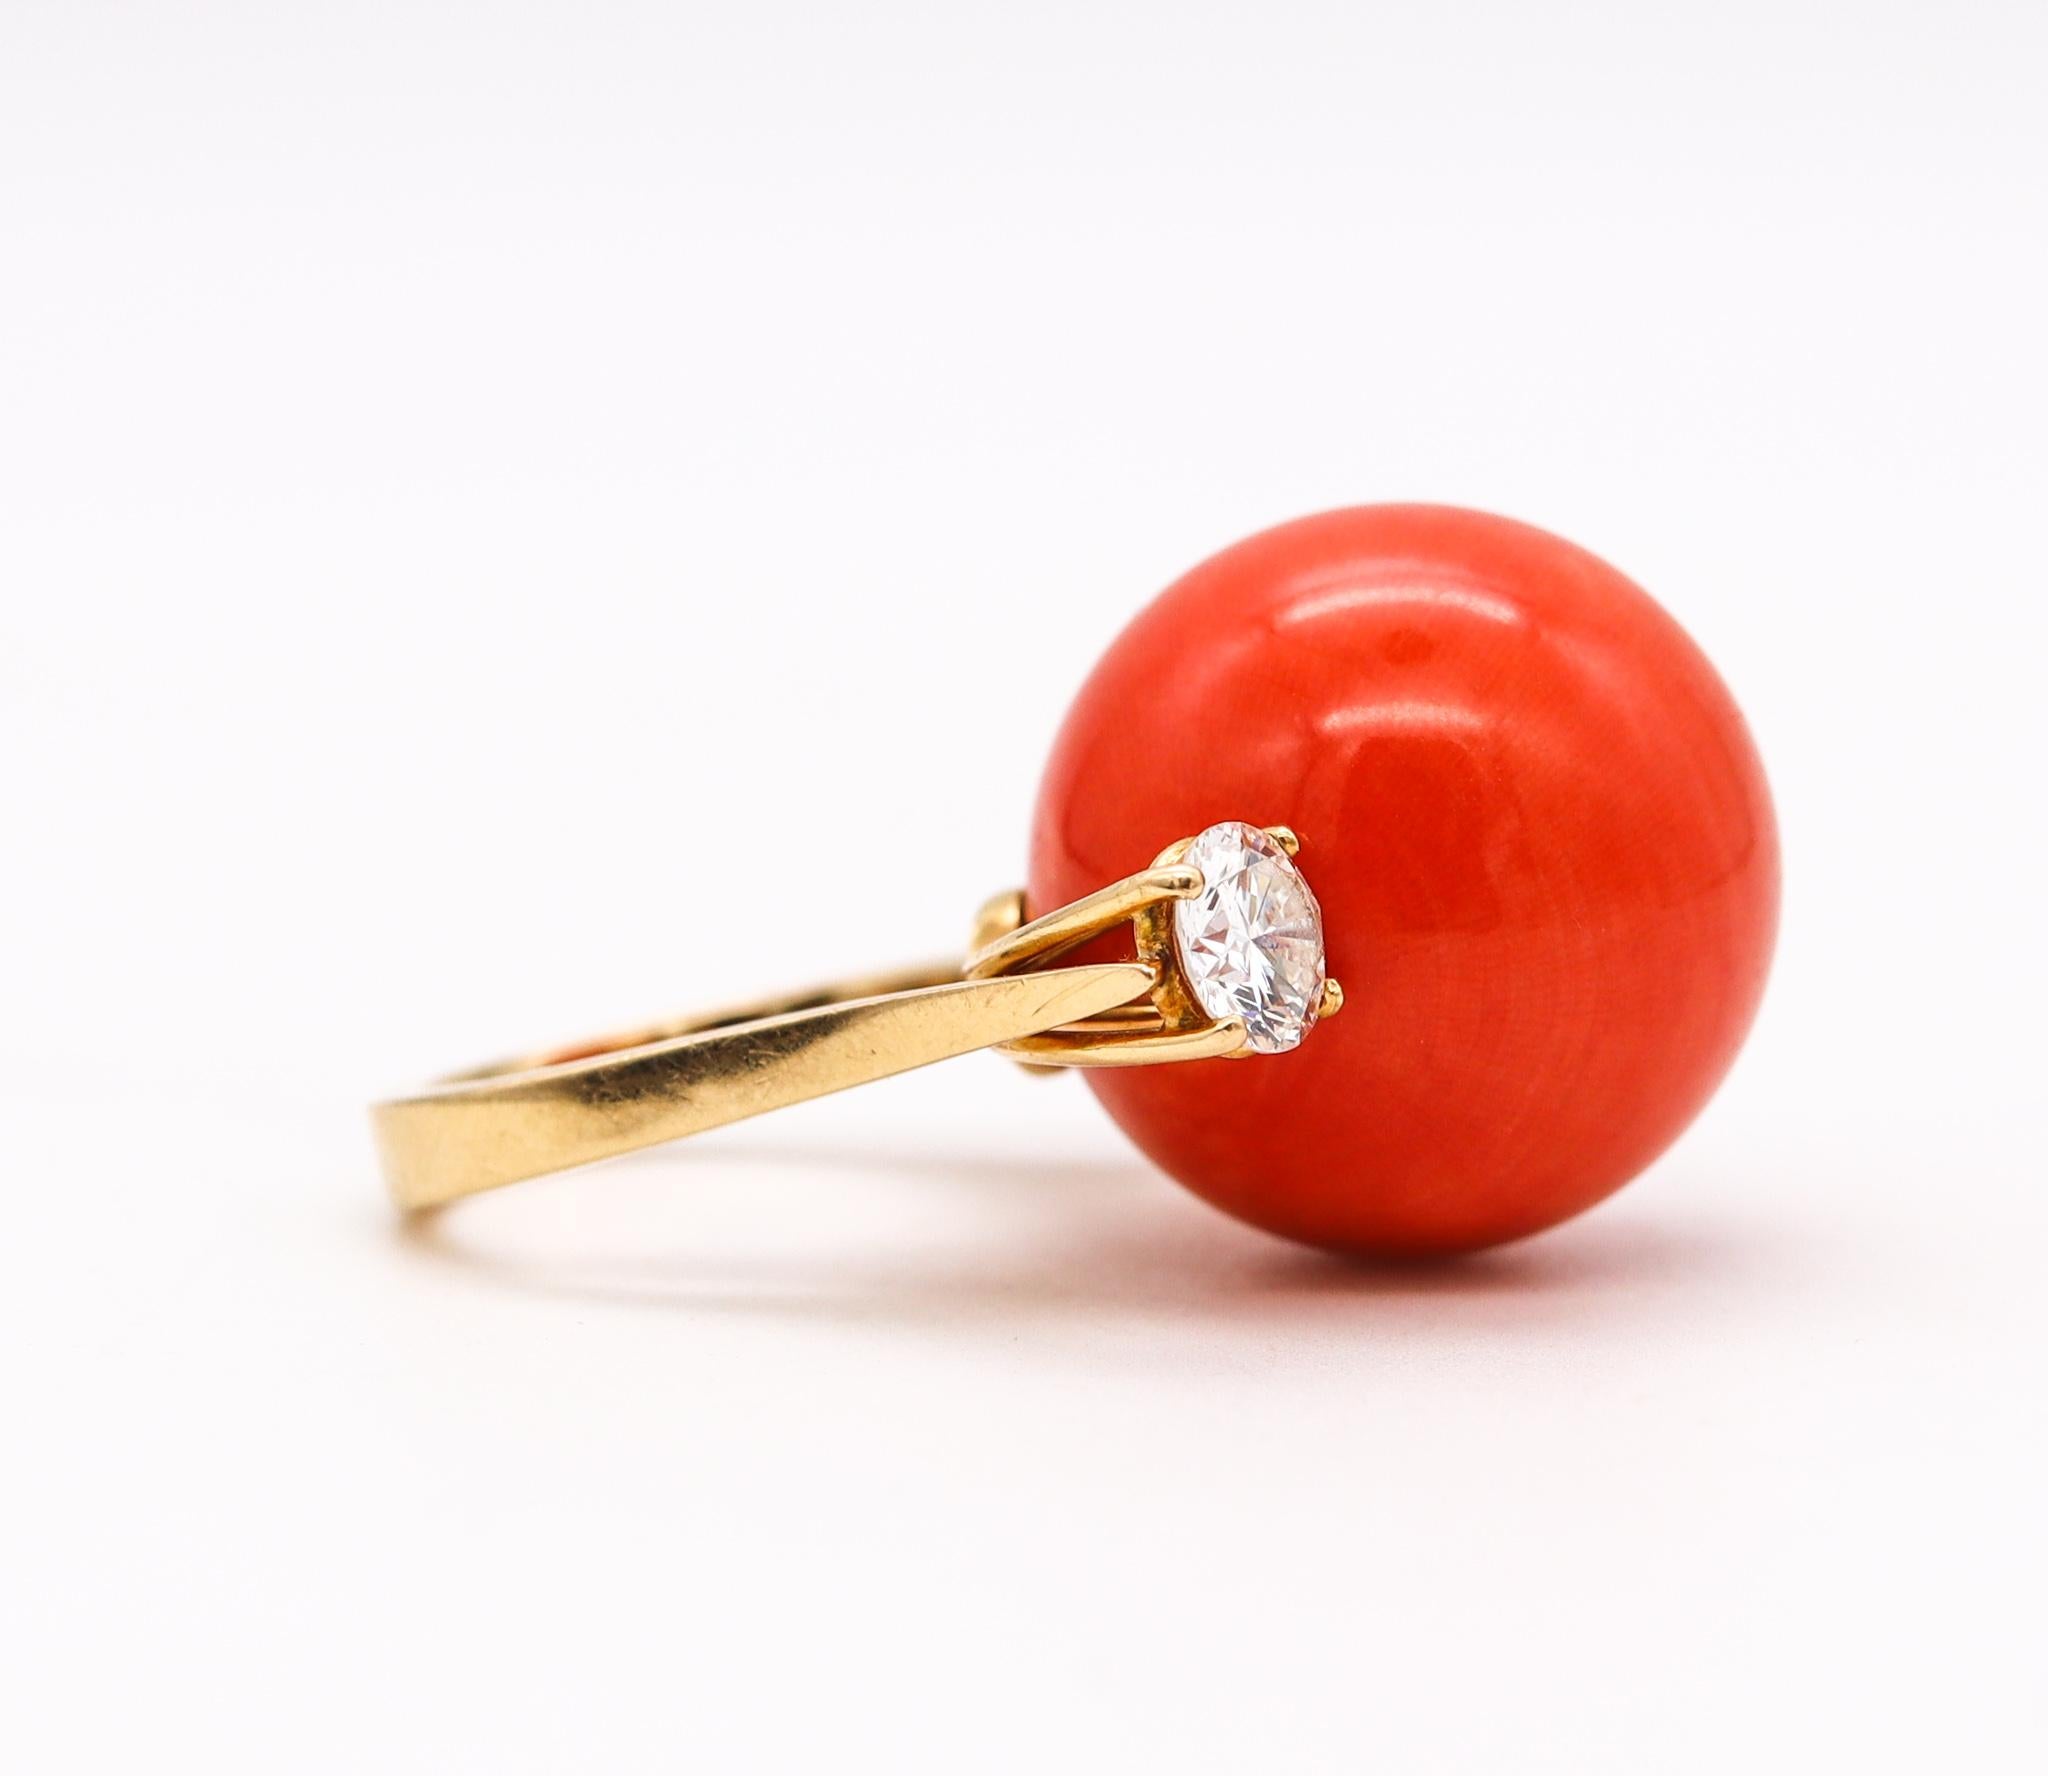 Modernist 1970 Italian Cocktail Ring In 18Kt Gold 27.17 Ctw In Diamonds & Coral For Sale 2